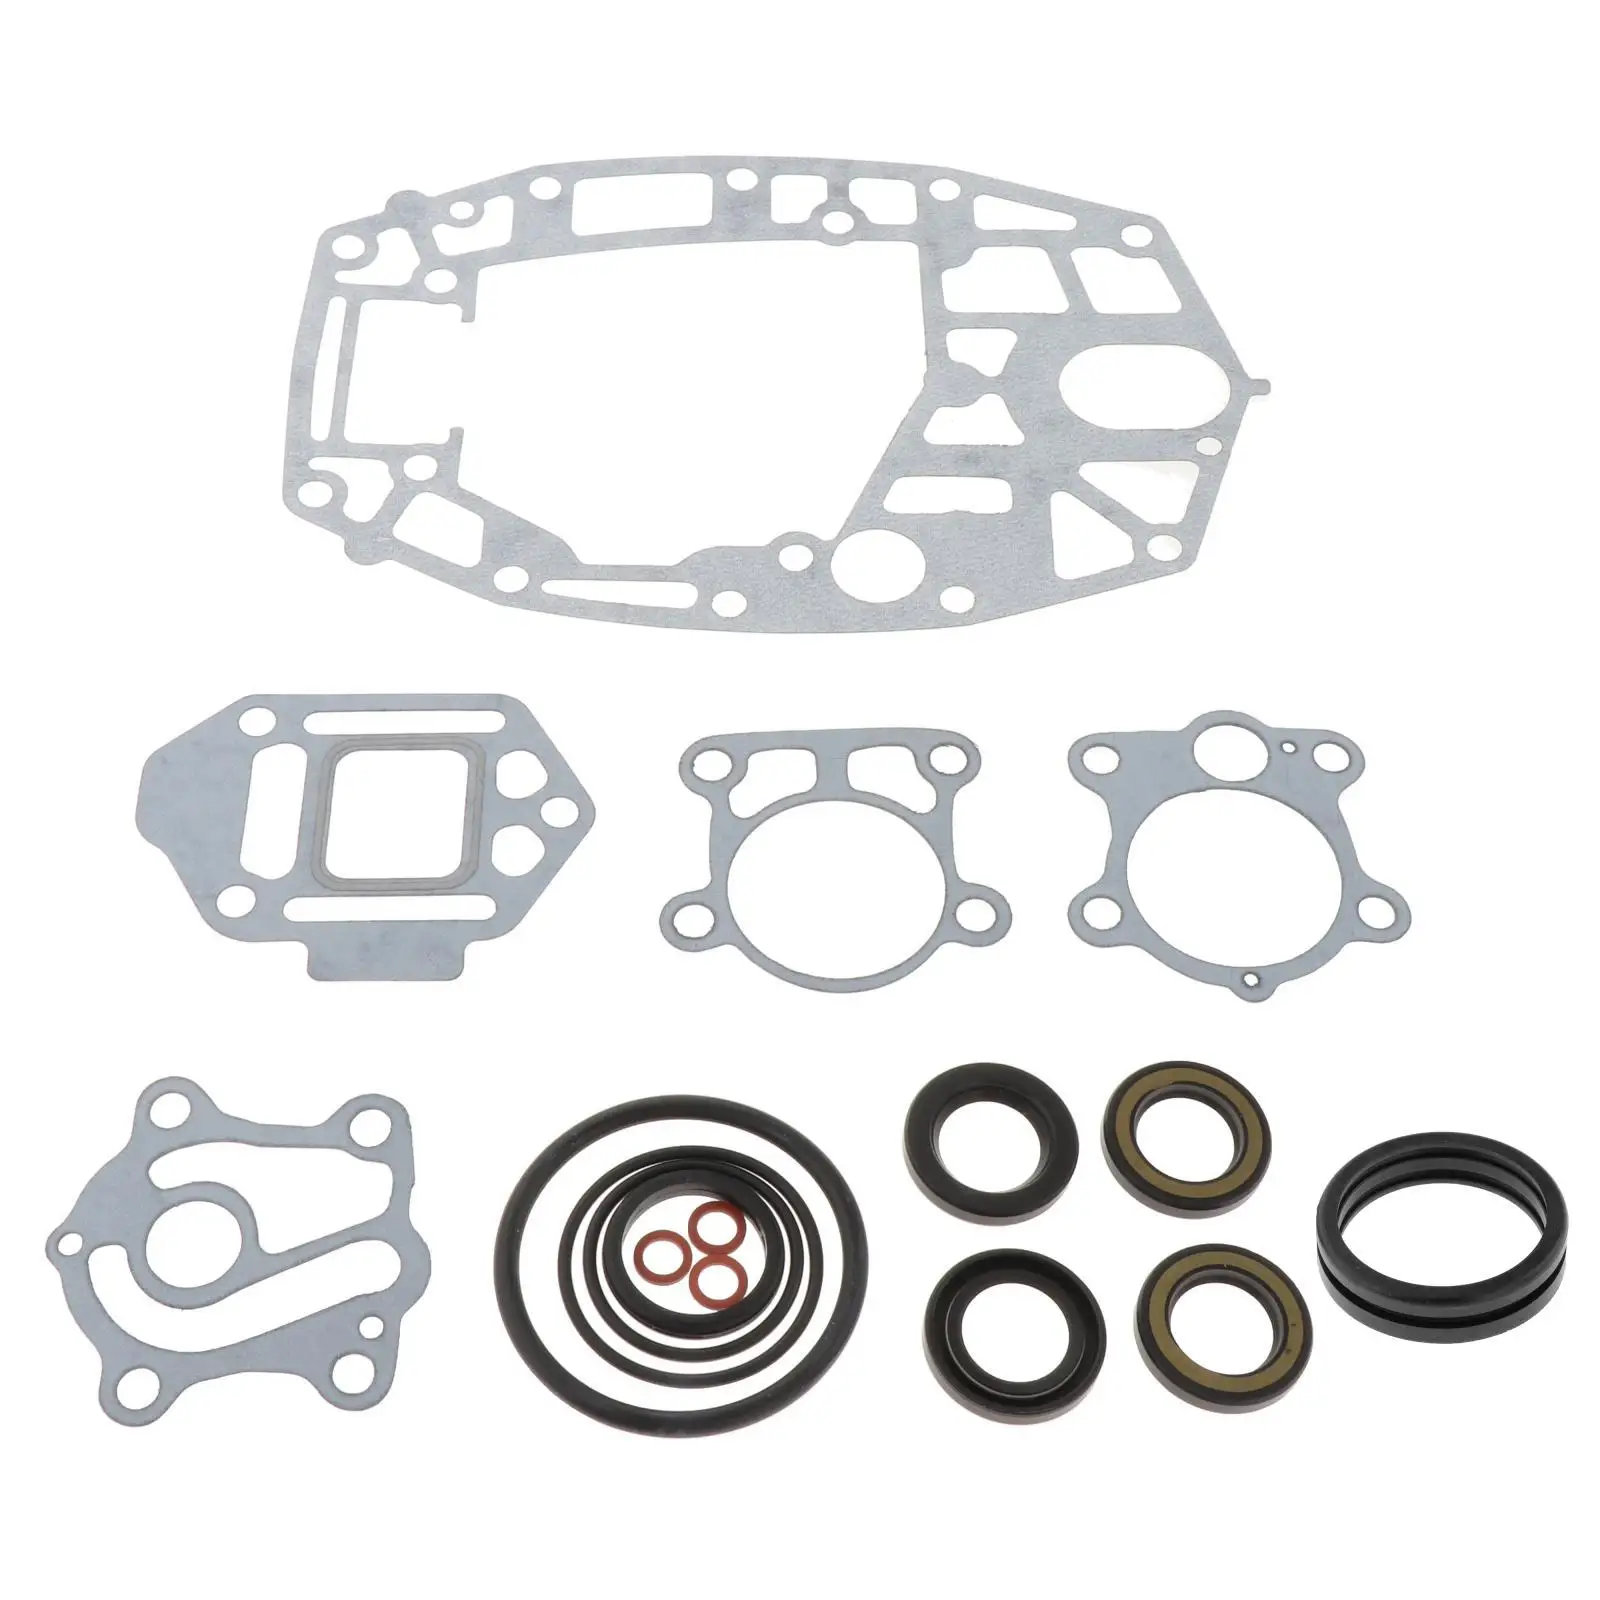 6H4-W0001-20-00 Lower Unit Seal Kit, Gearcase 18-2792 6H4-W0001-21-00 for Yamaha